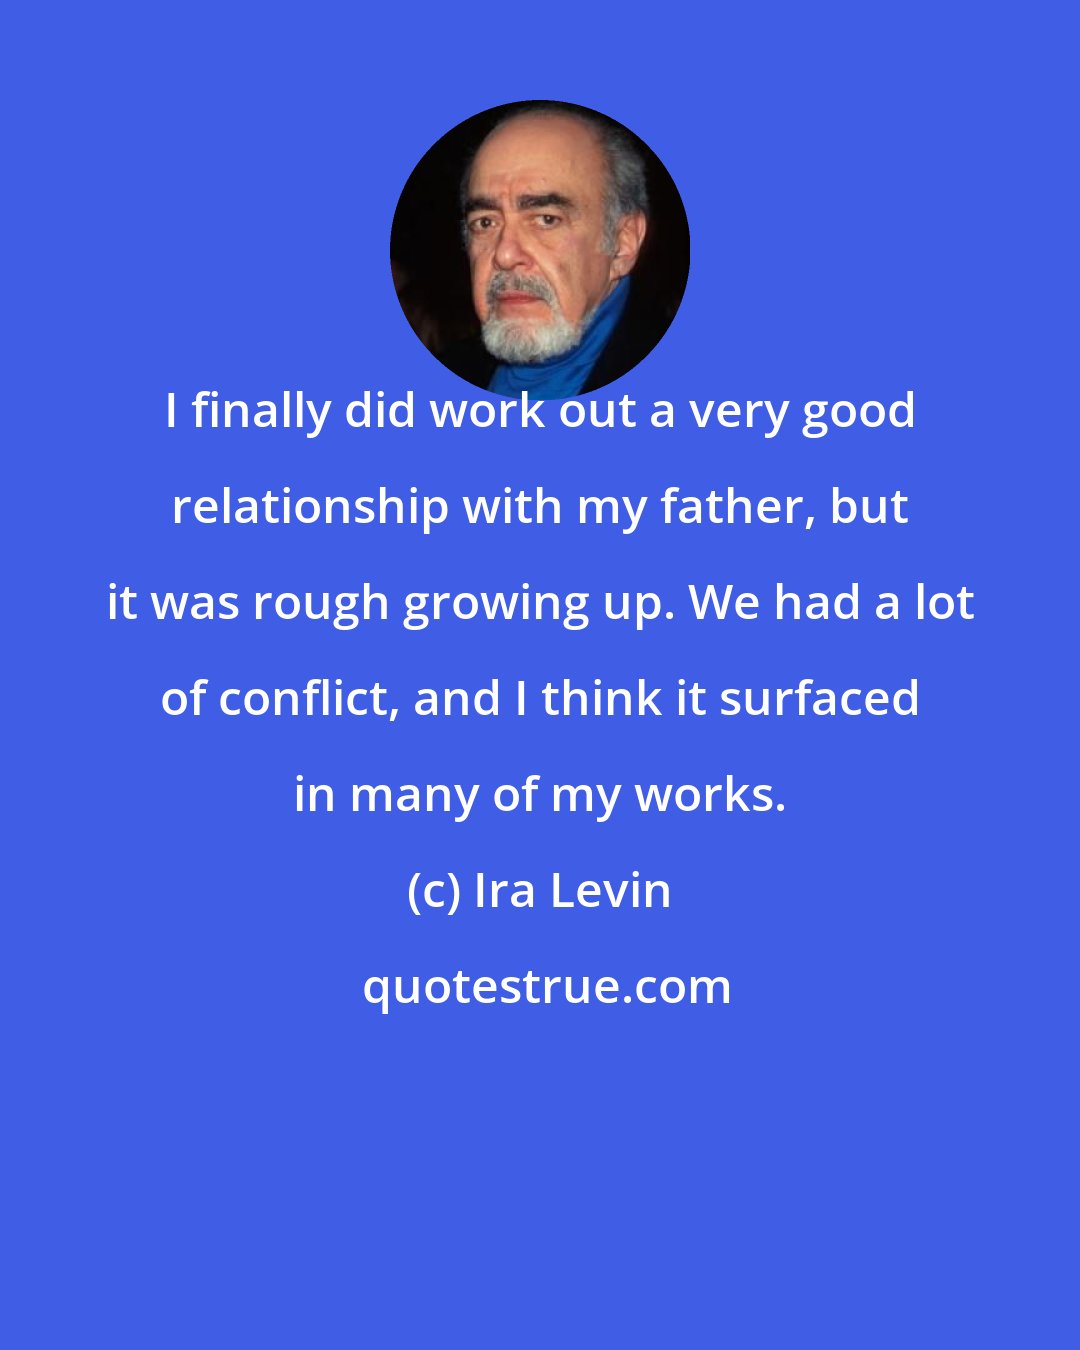 Ira Levin: I finally did work out a very good relationship with my father, but it was rough growing up. We had a lot of conflict, and I think it surfaced in many of my works.